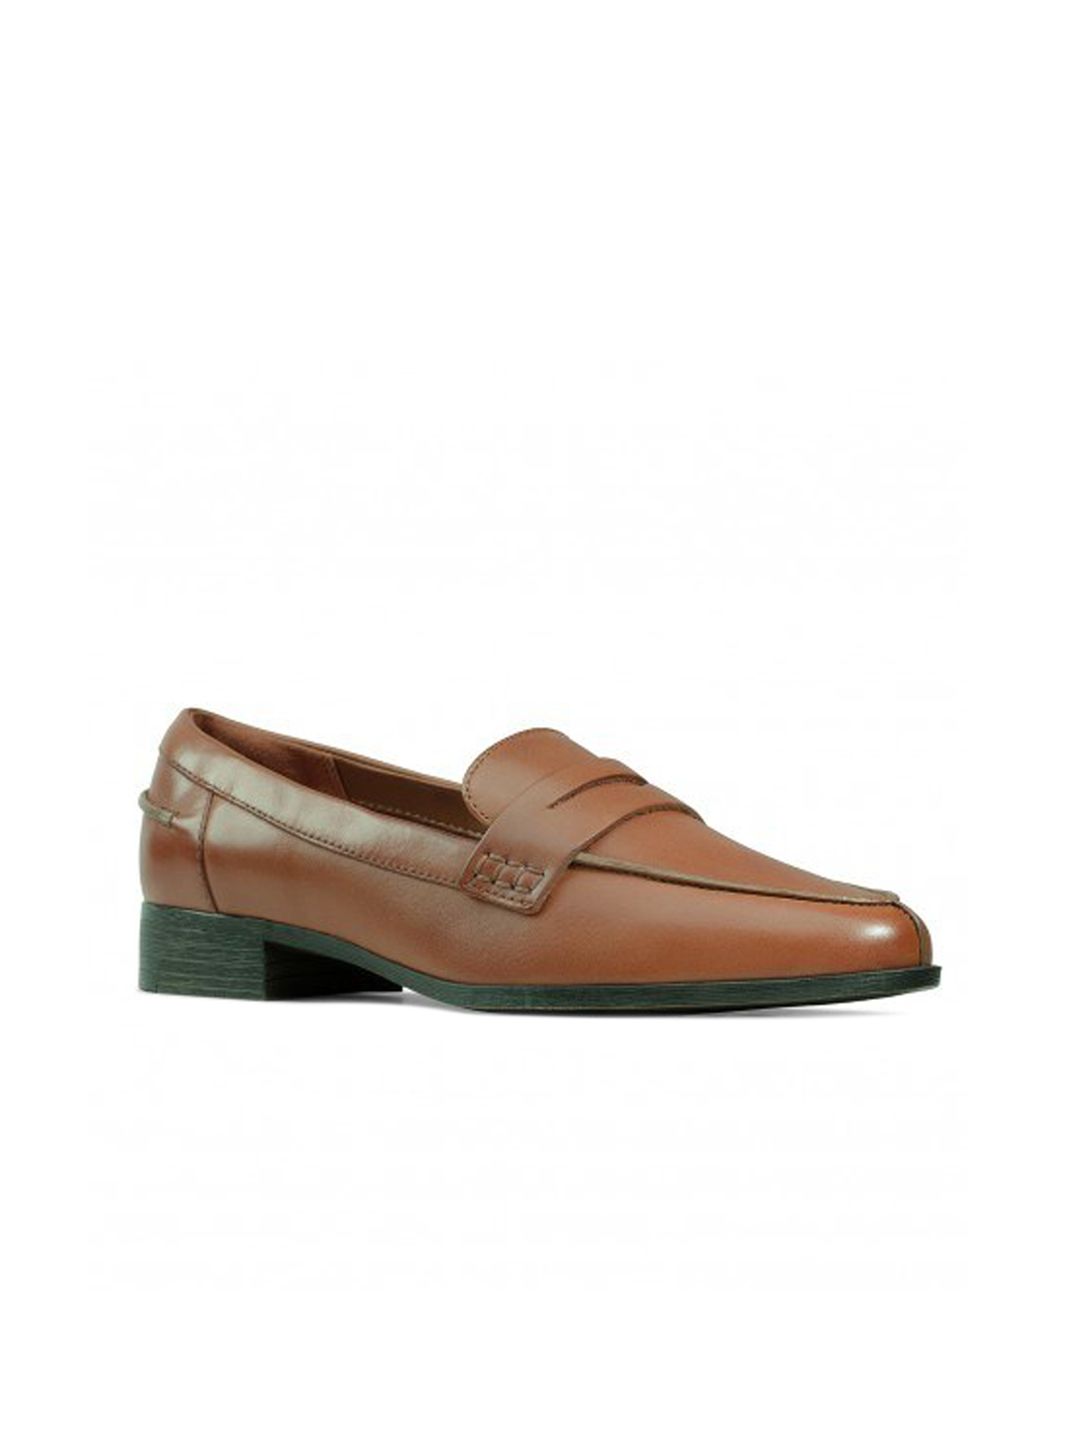 Clarks Women Brown Leather Loafers Price in India